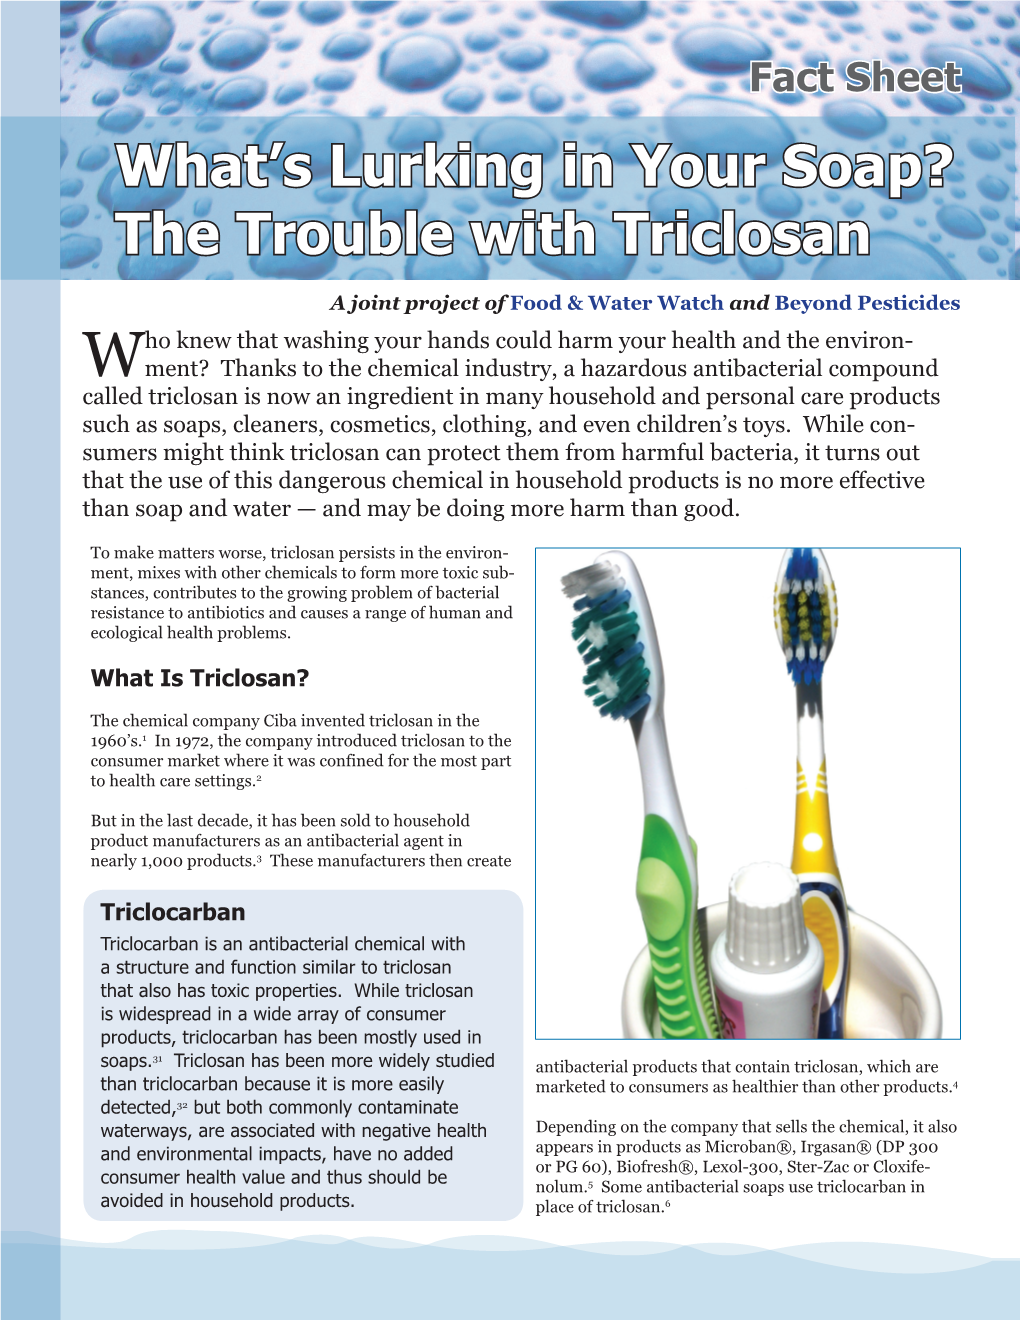 The Trouble with Triclosan